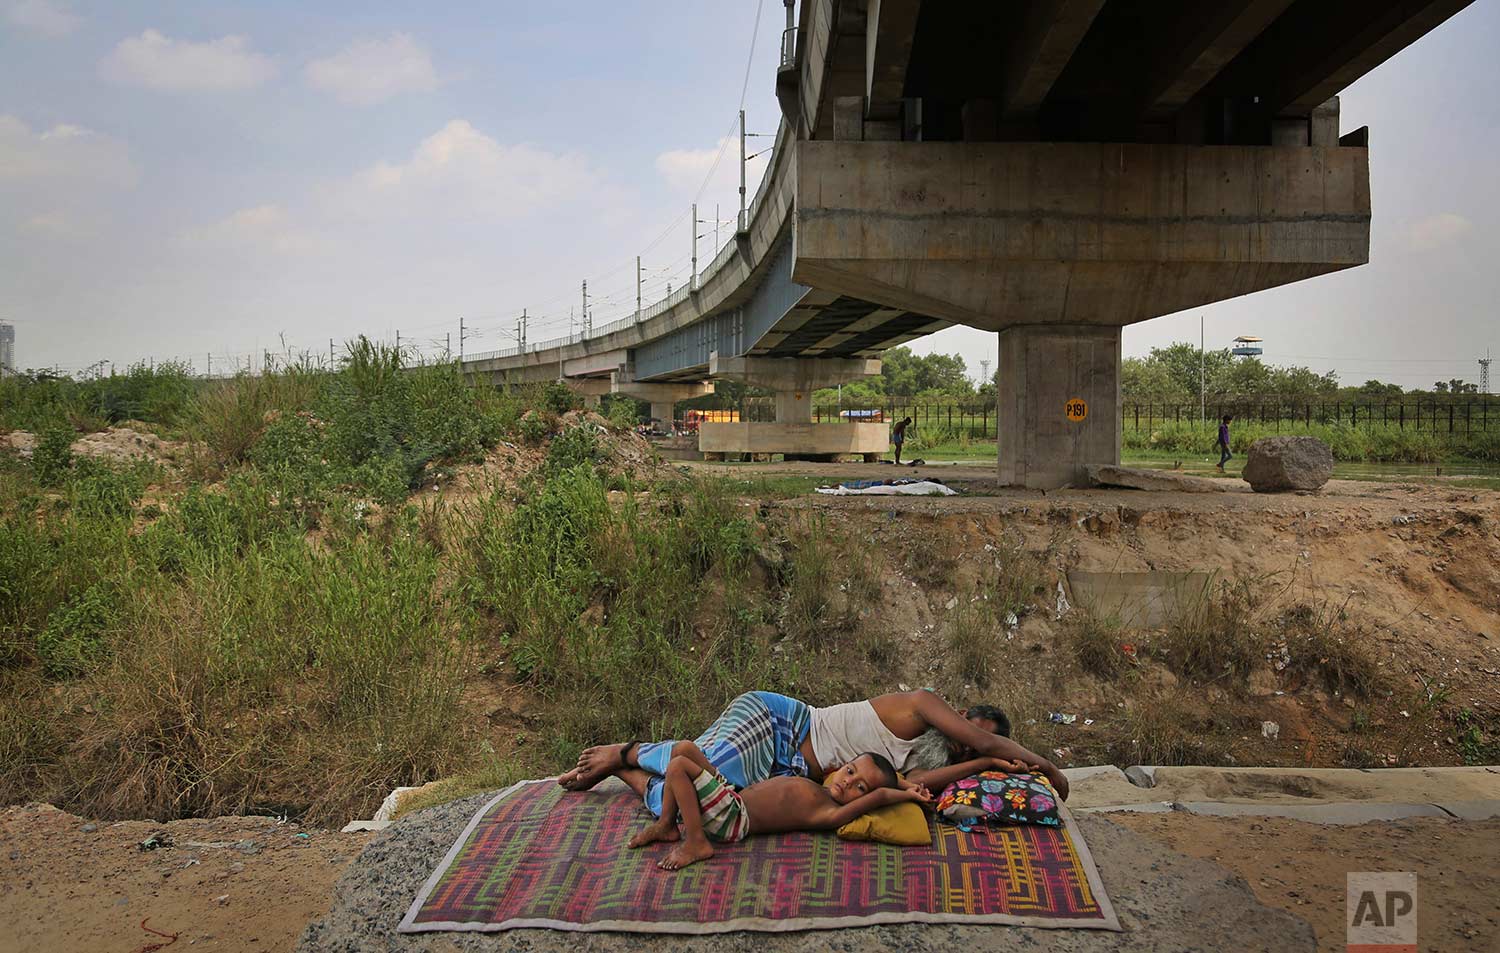  A Rohingya refugee takes a nap as a child lies next to him outside a temporary shelter in New Delhi, India, Wednesday, Aug. 16, 2017. (AP Photo/Altaf Qadri) 